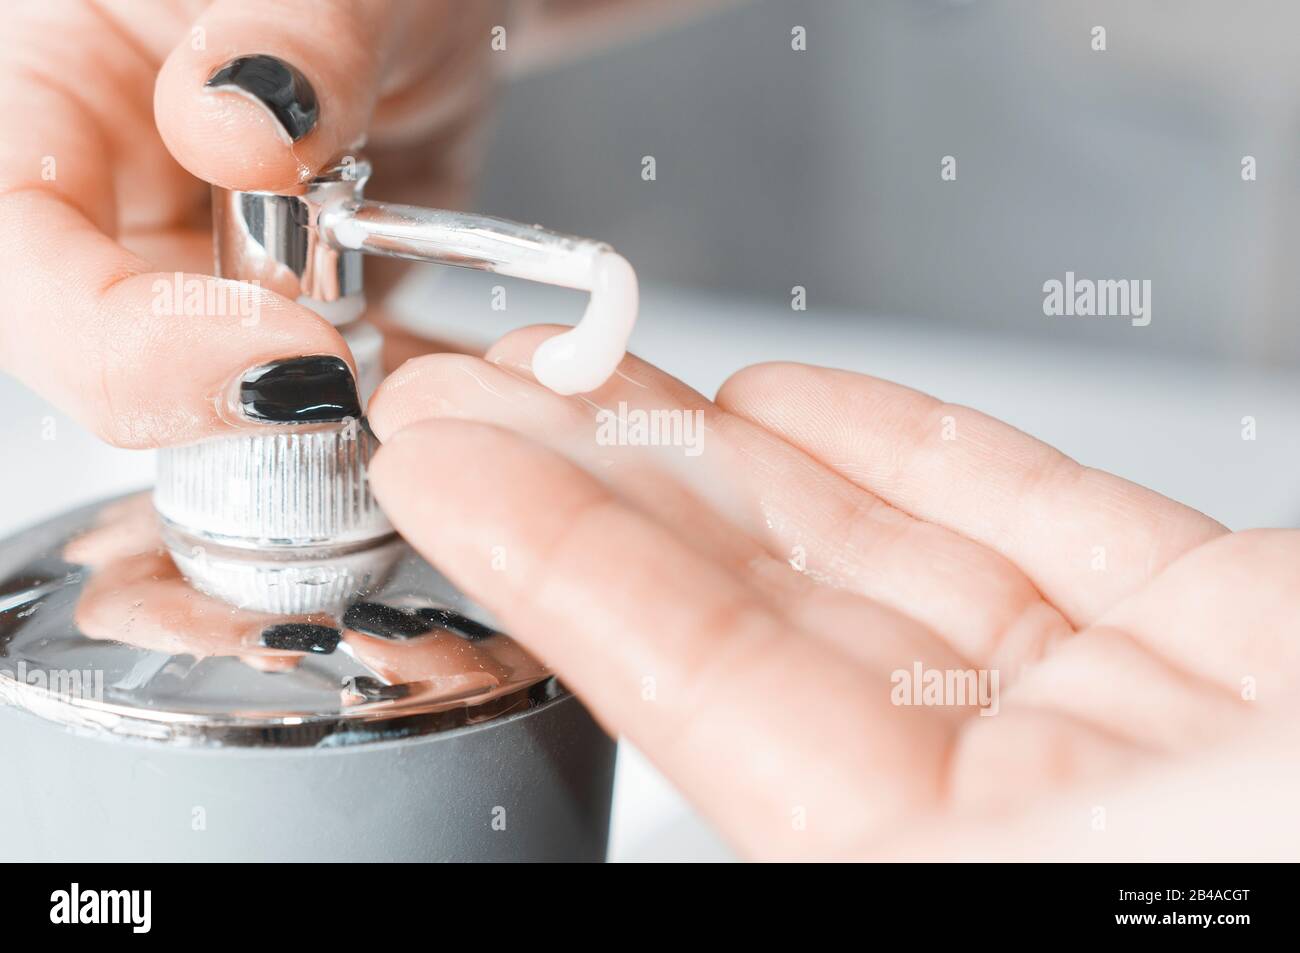 Effective handwashing techniques: Woman soaping her hands. Hand washing is very important to avoid the risk of contagion from coronavirus and bacteria Stock Photo